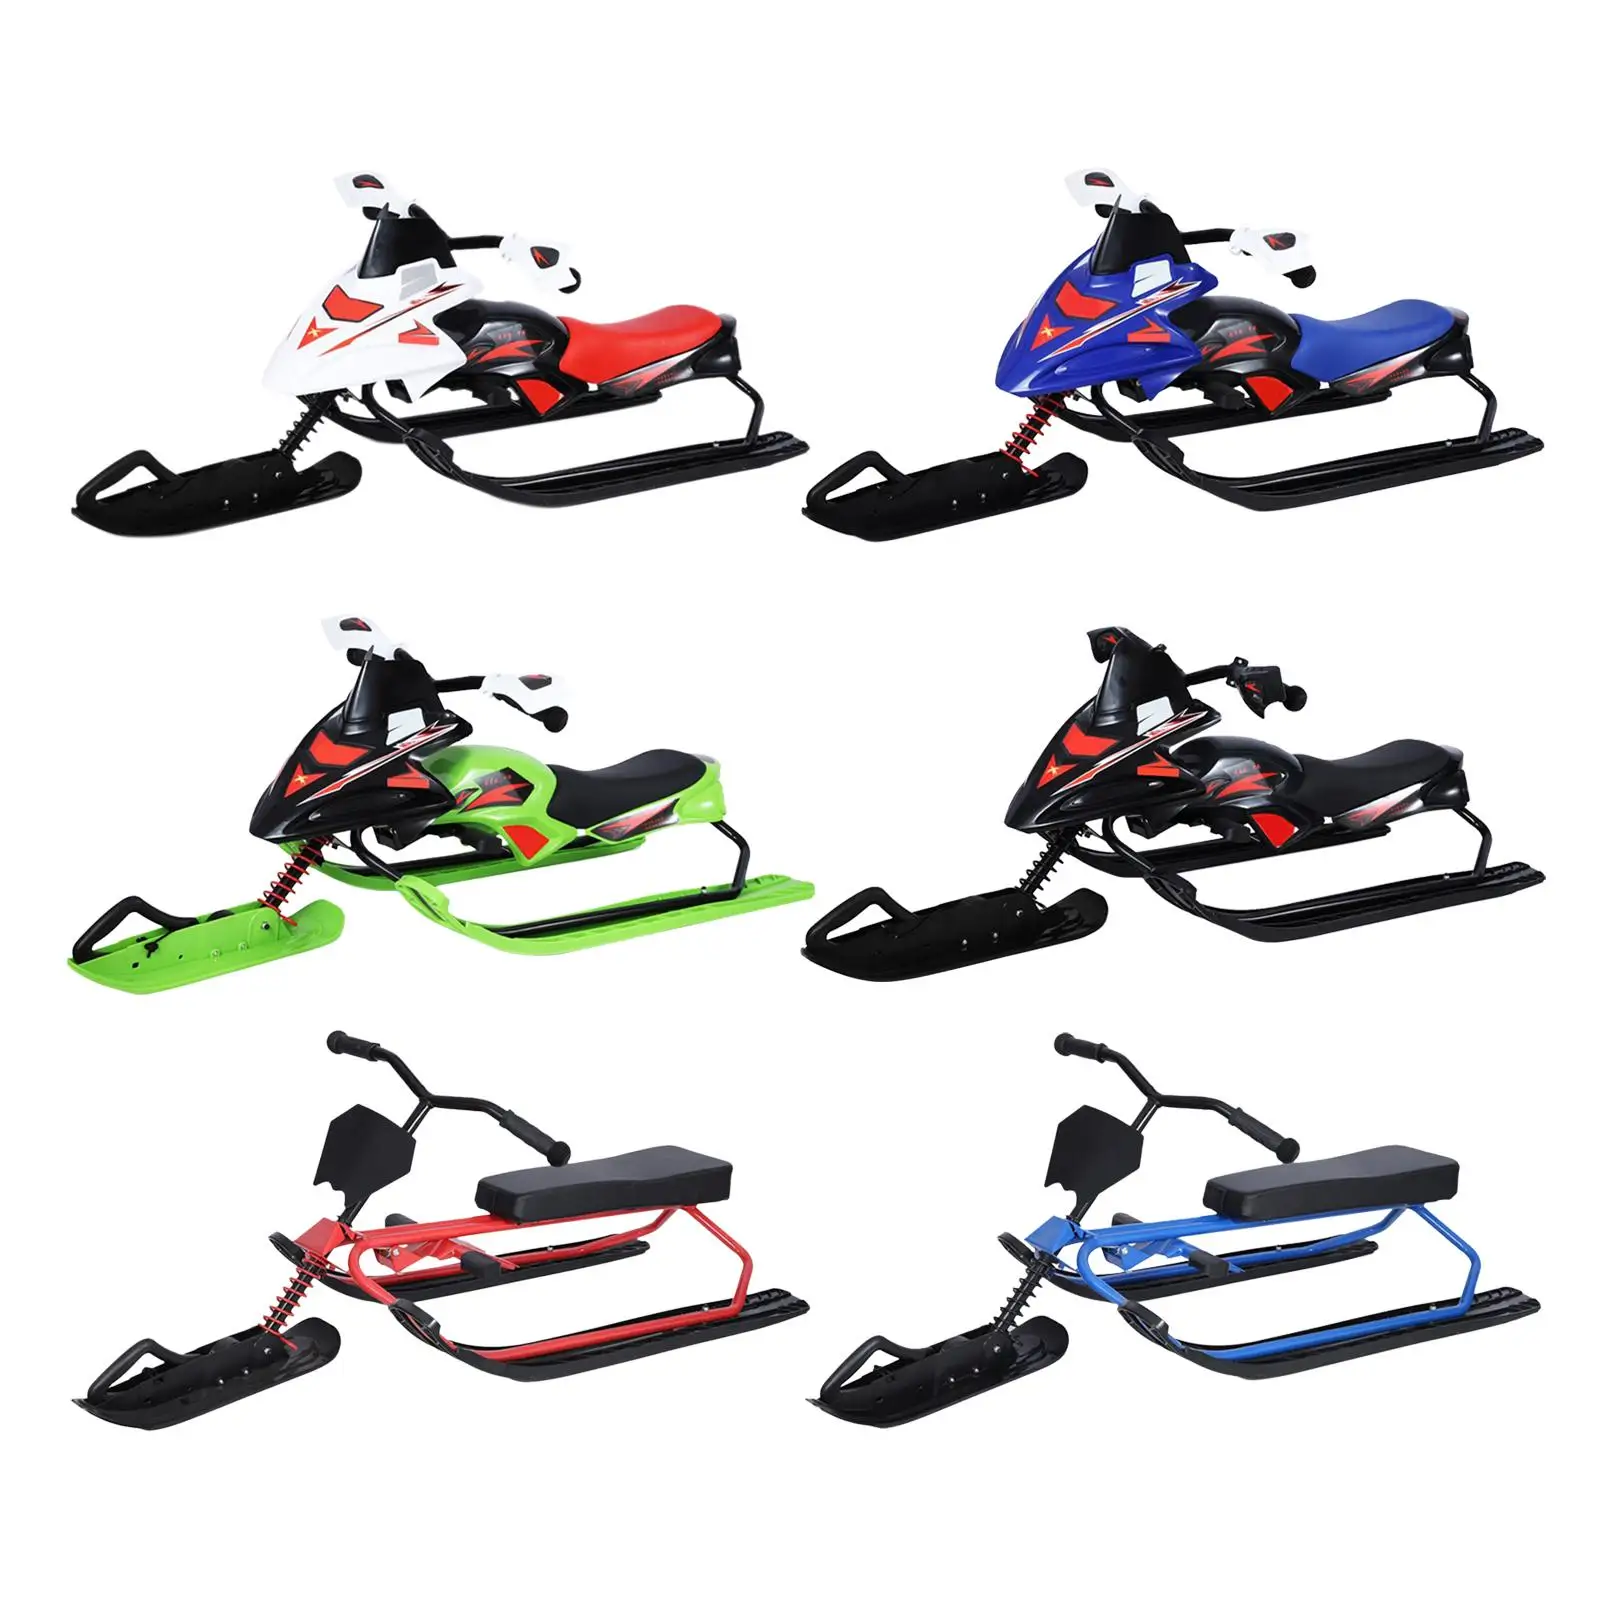 Snow Racer Sled with Steering Wheel and Bicycle Handle and Twin Brakes for Downhill and Uphill Sleigh Ski Sled for Winter Sport